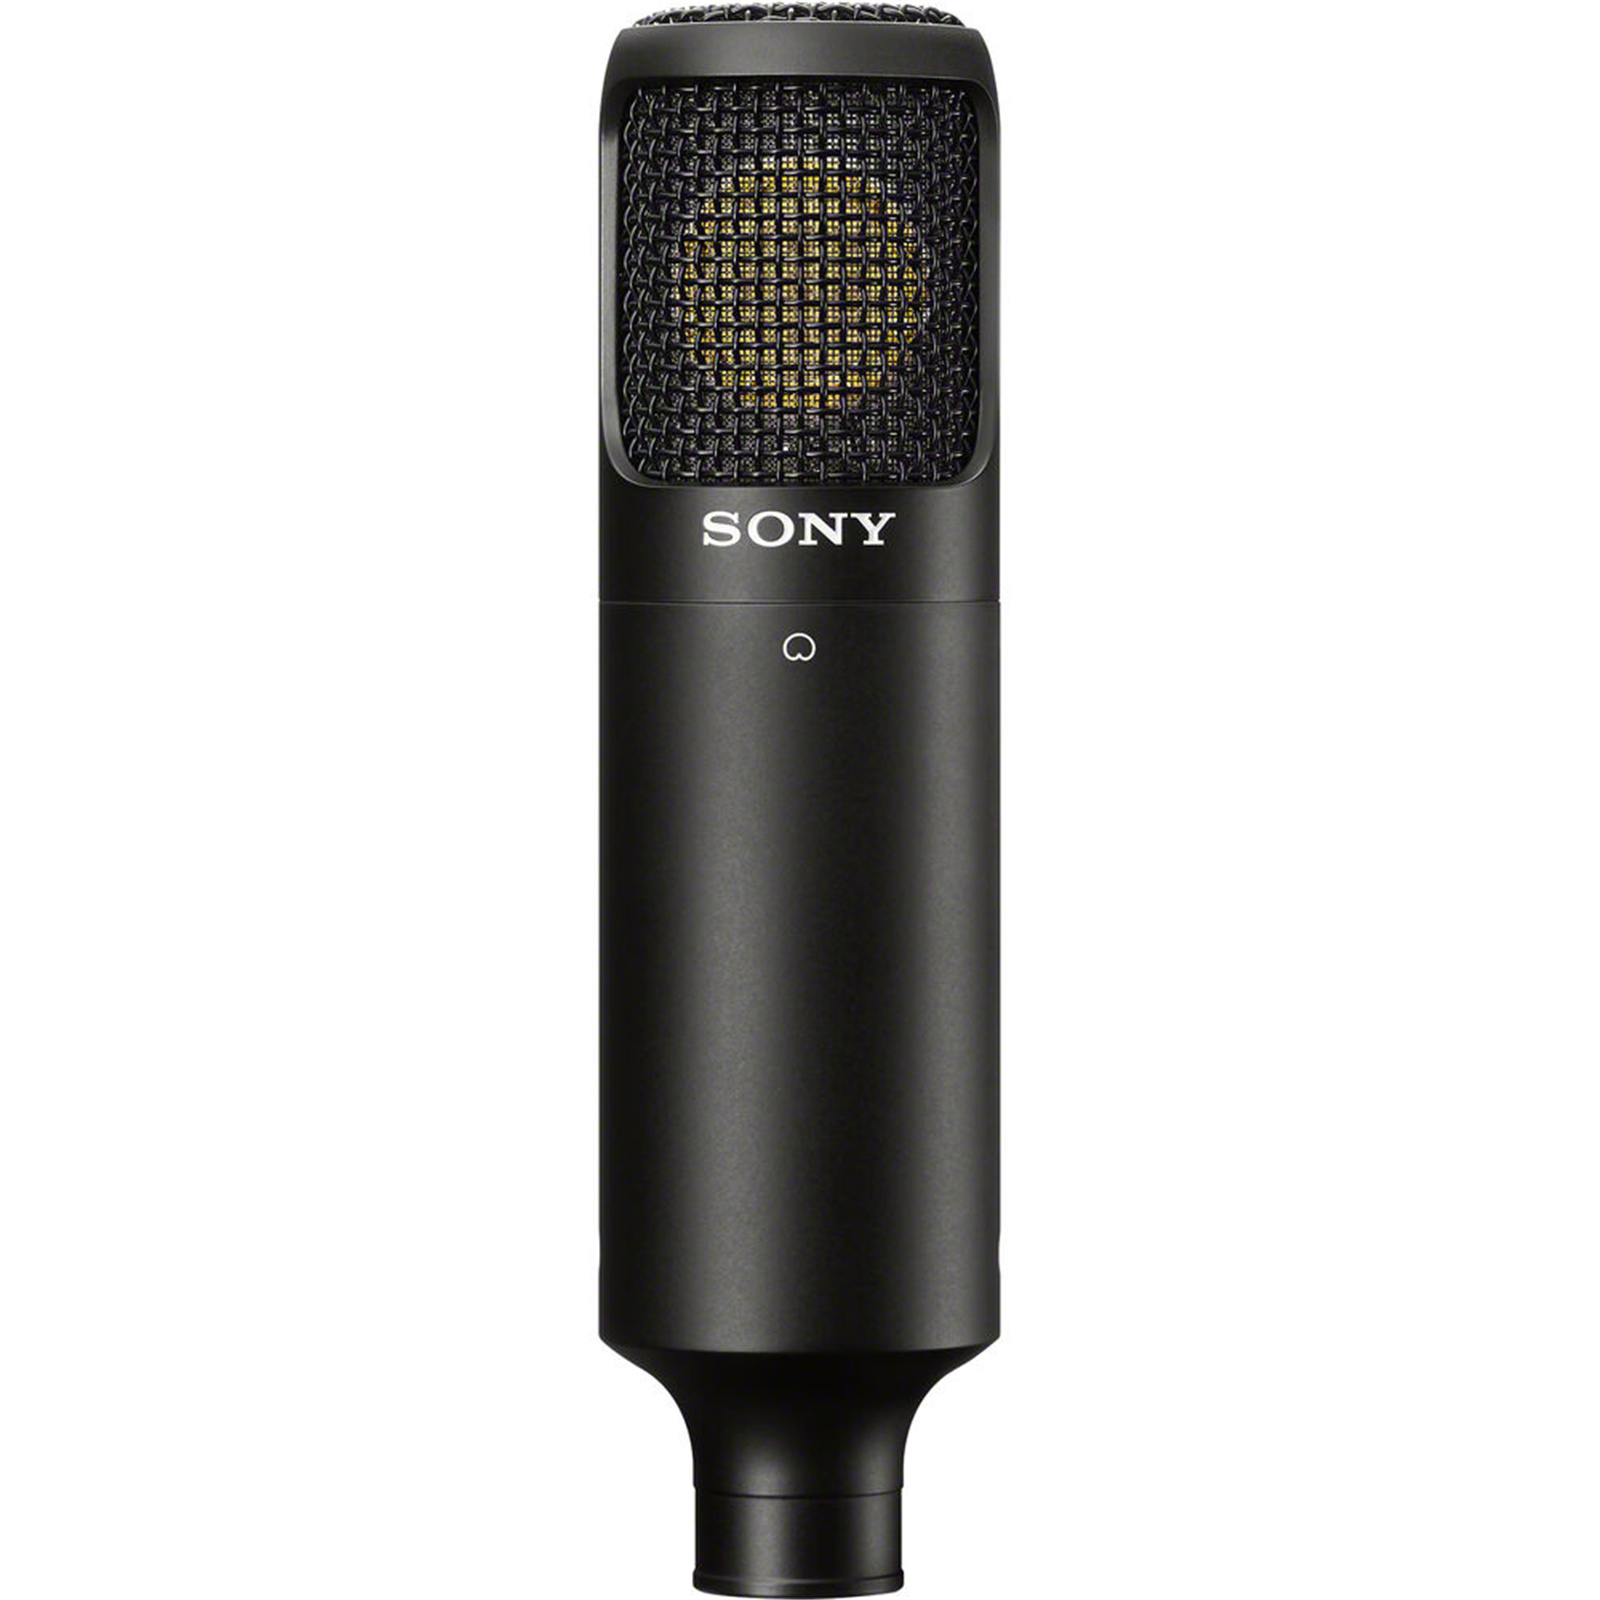 Sony C80 Unidirectional Professional Studio Condenser Microphone for Voice / Vocal Recording - XLR connector - Low-cut filter & 10dB pad - Carry case & shockmount suspension cradle included - NZ DEPOT